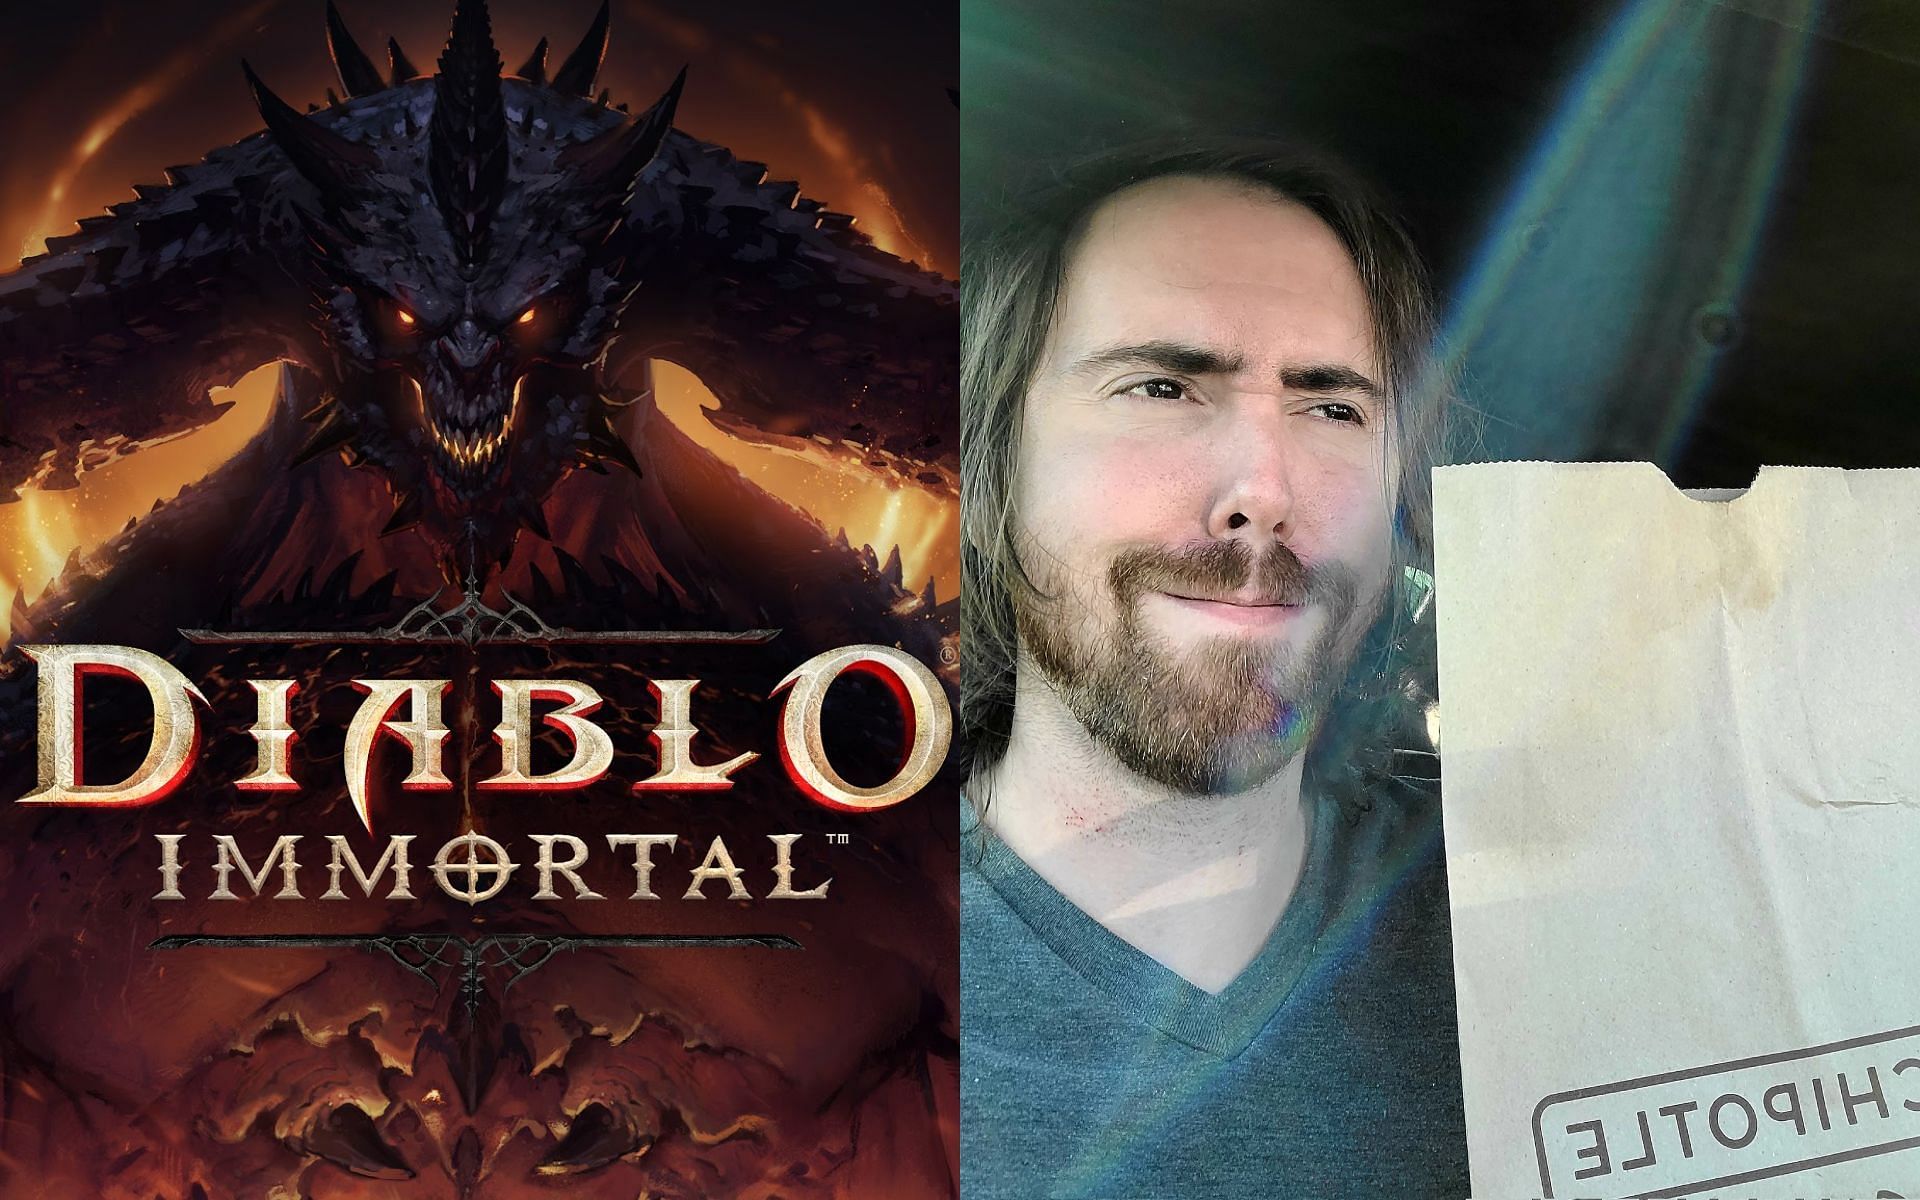 diablo immortal banned from china